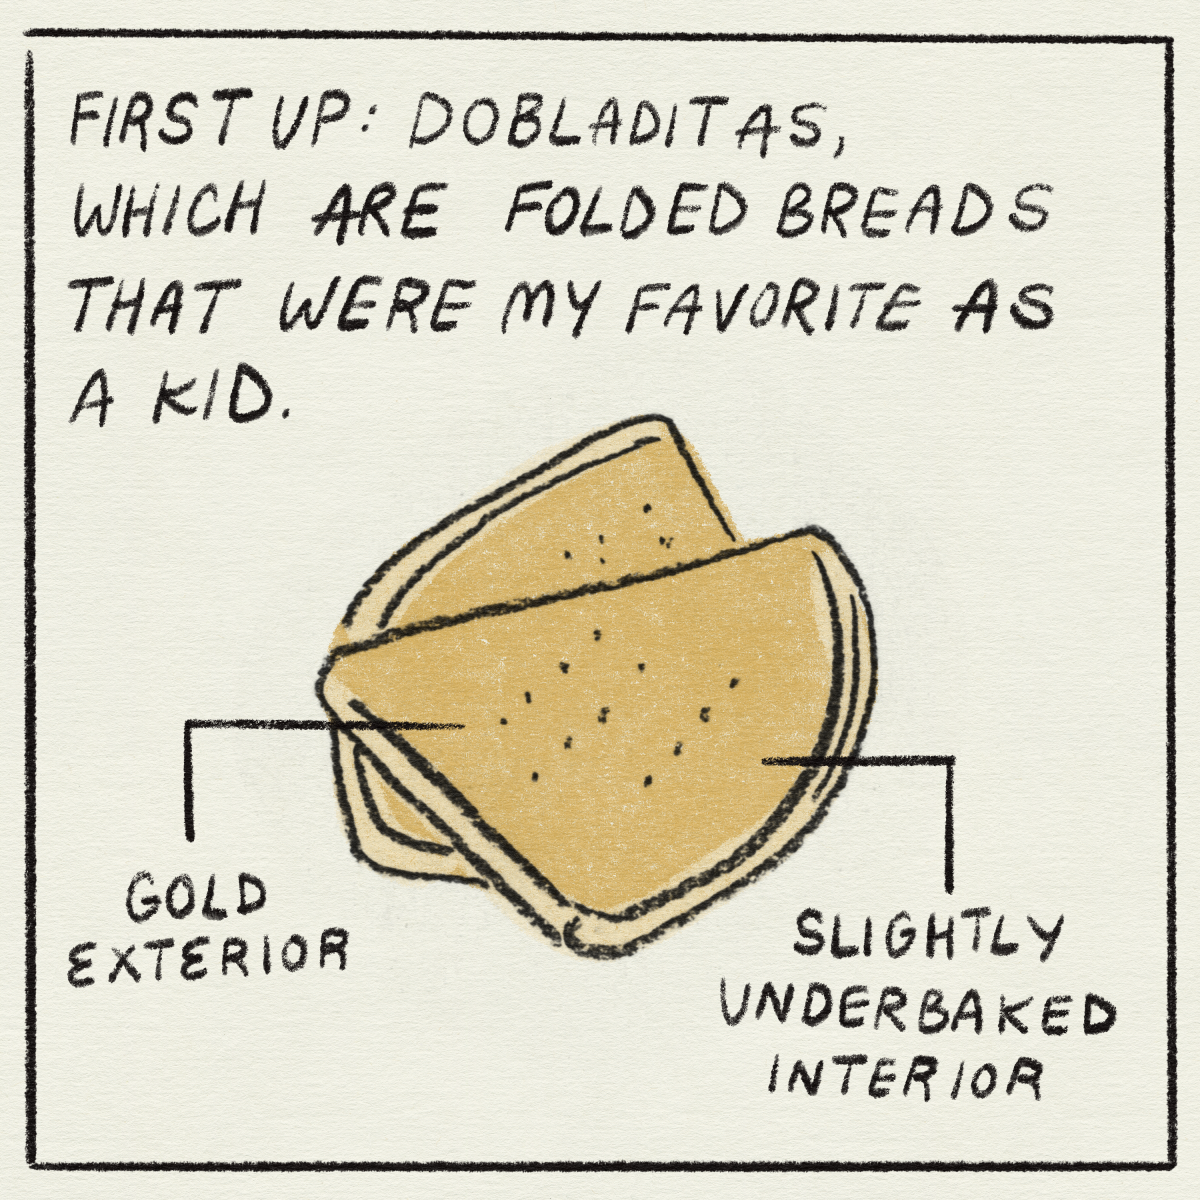 First up" dobladitas, which are folded breads that were my favorite as a kid." "gold exterior, slightly underbaked interior."